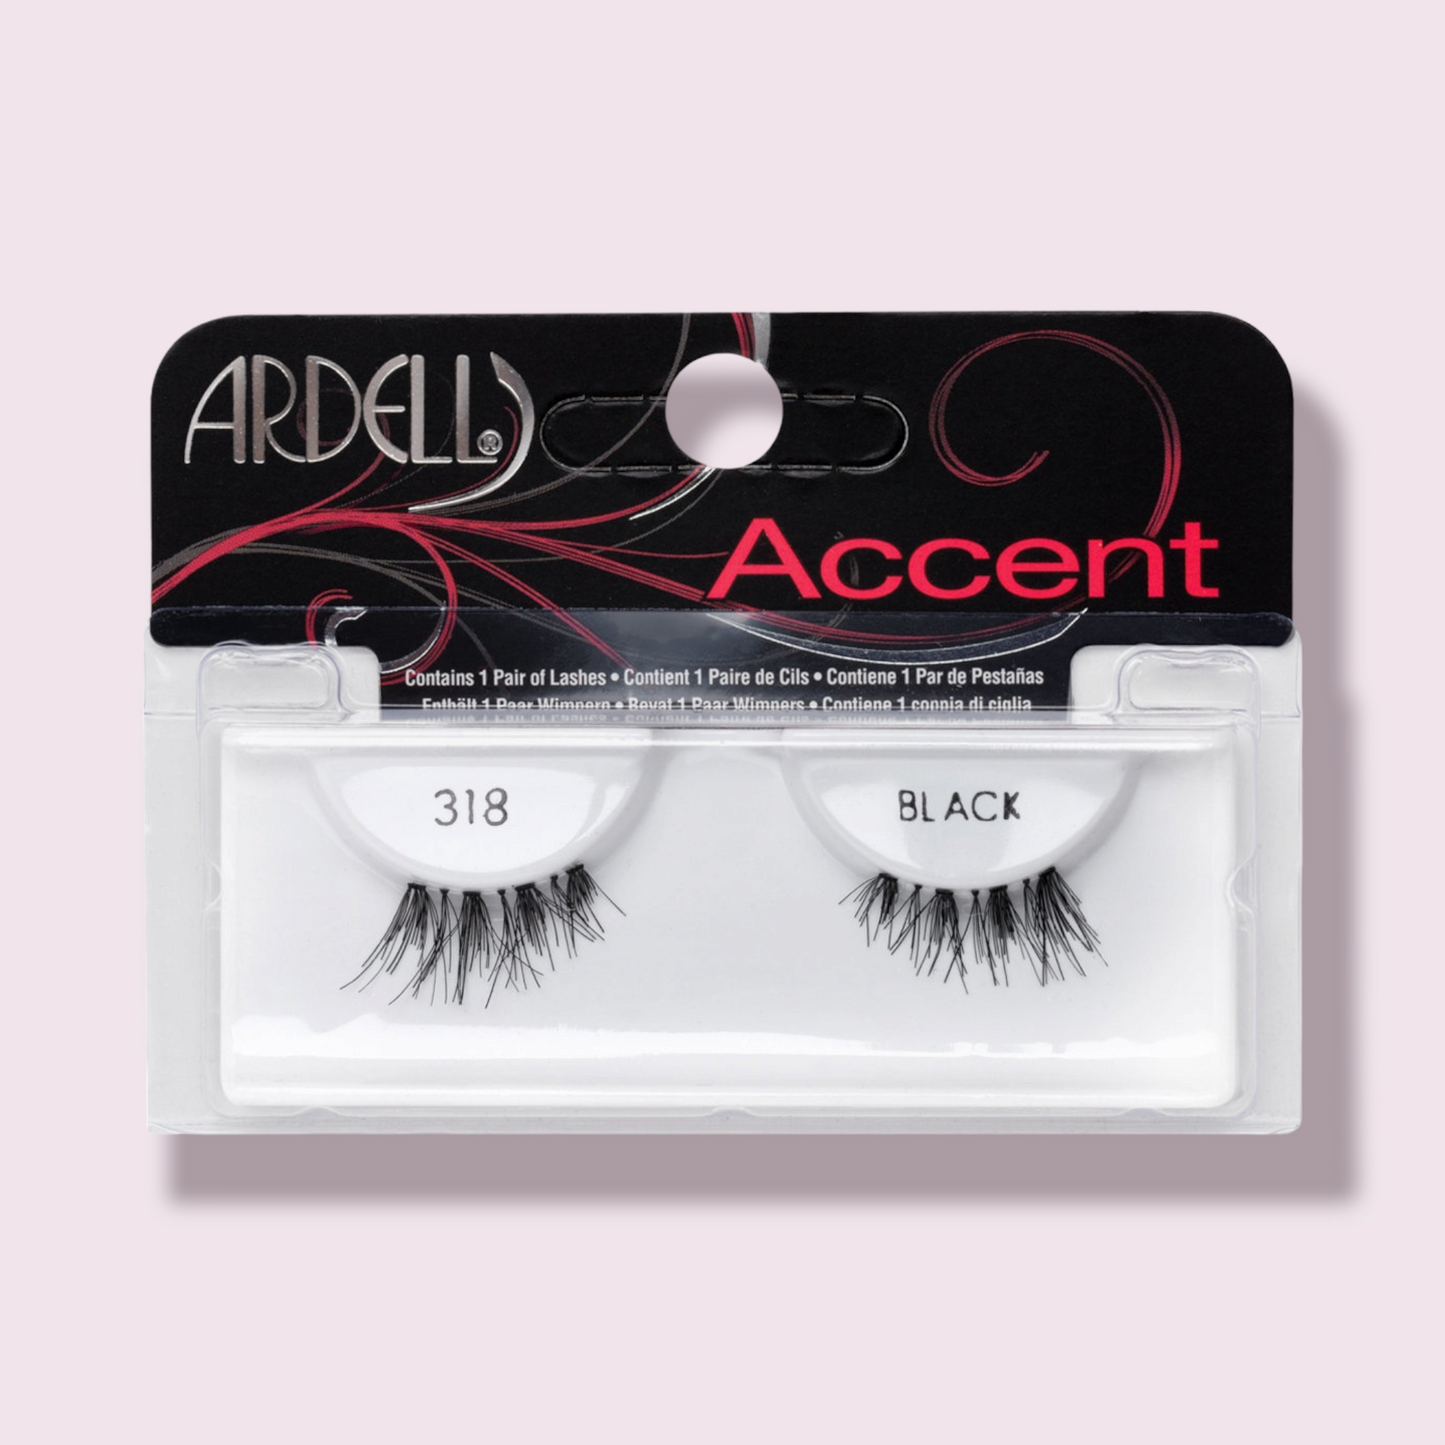 Ardell - Accent 318